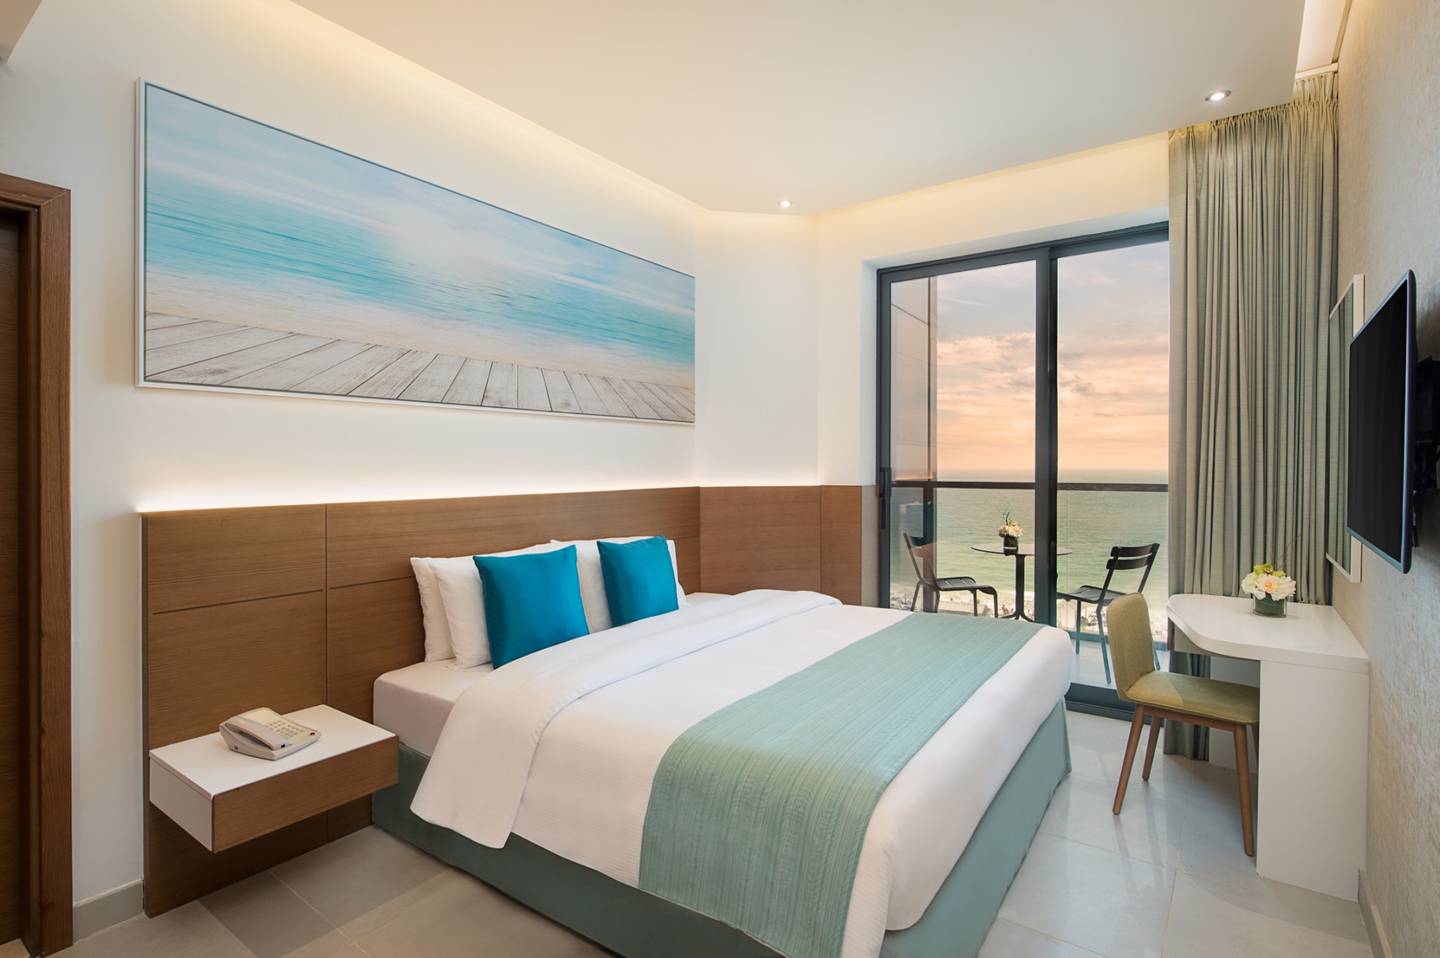 Enjoy a family vacation this summer at Wyndham Garden Ajman Corniche.  Wyndham Garden Ajman Corniche